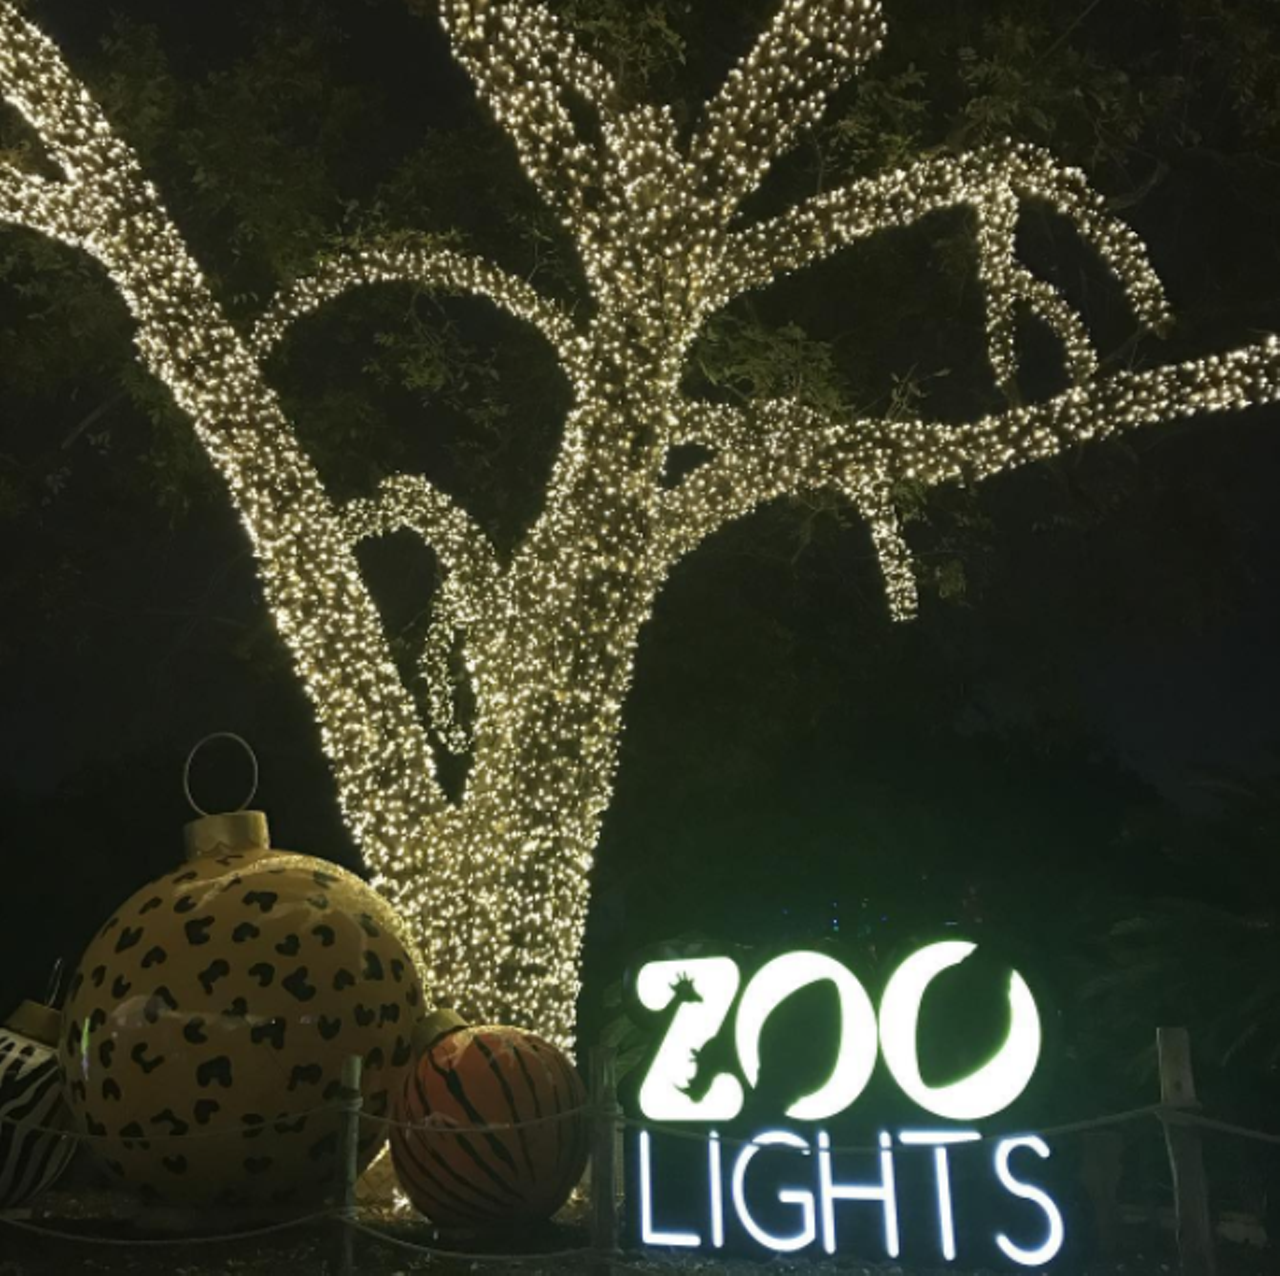 Check out Christmas lights at the Zoo
Get Merry & Bright at the San Antonio Zoo this season and stroll under twinkling lights as you sip hot chocolate and check out the zoo's new show. Don't miss on the newly added ice skating rink and camel rides. 
Photo via Instagram, dtorres3